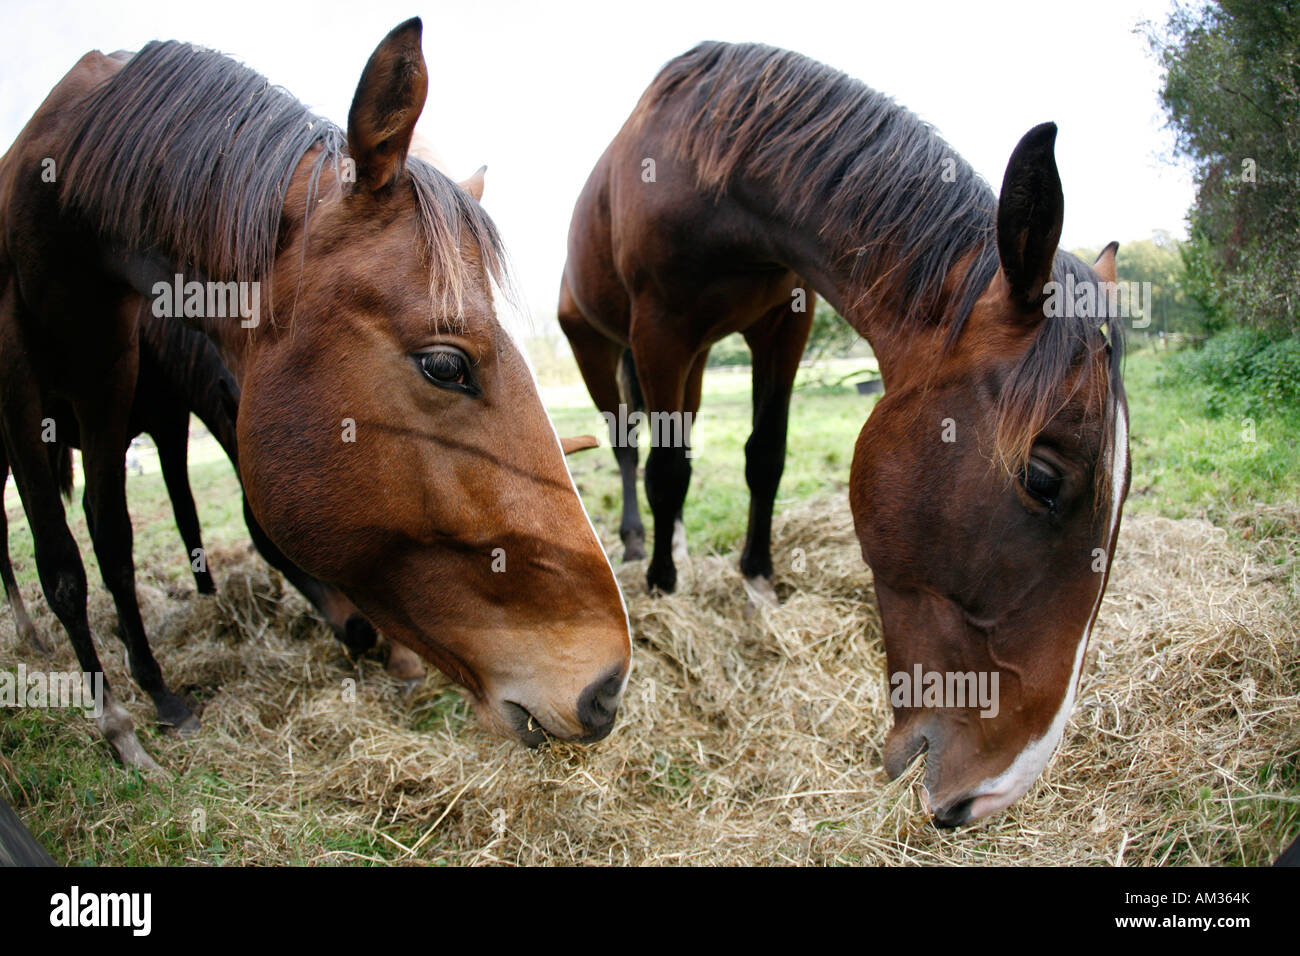 Two young horses eating hey on a meadow, Wohldorf, Hamburg, Germany (fisheye lense) Stock Photo